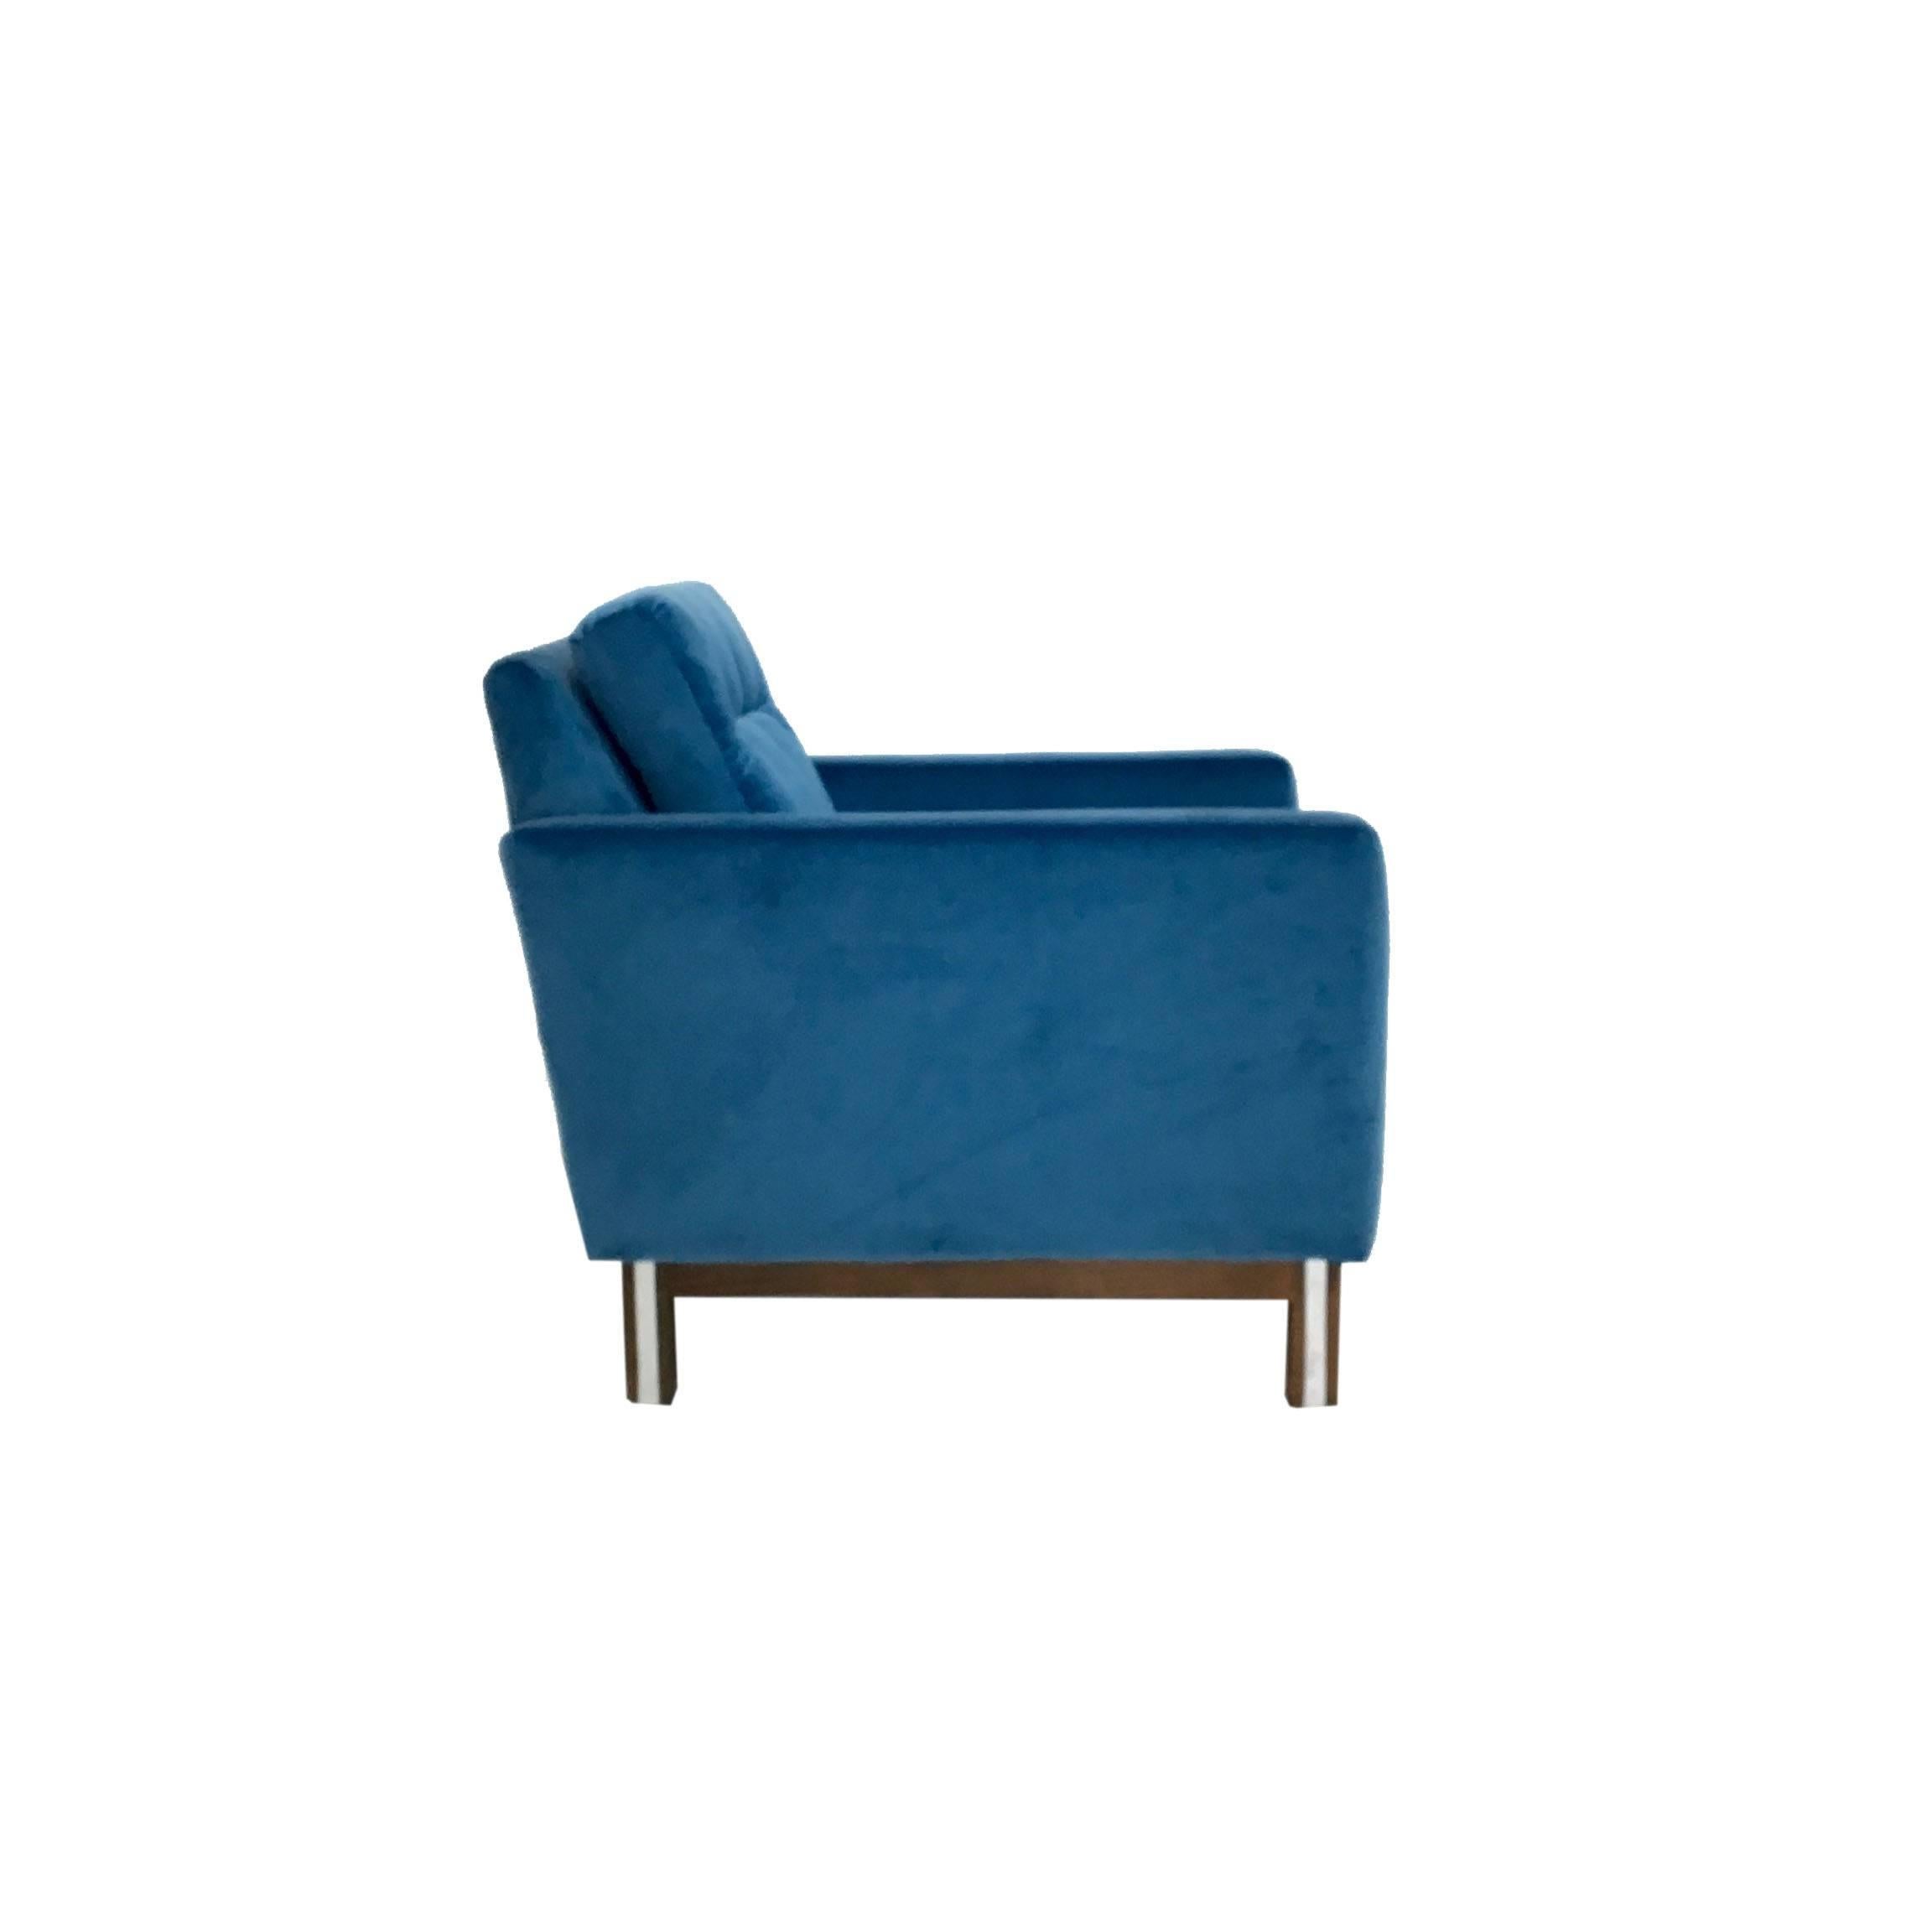 A Mid-Century Modern lounge chair in electric blue velvet. Base is chrome and wood frame. 
Measurements: 29.5